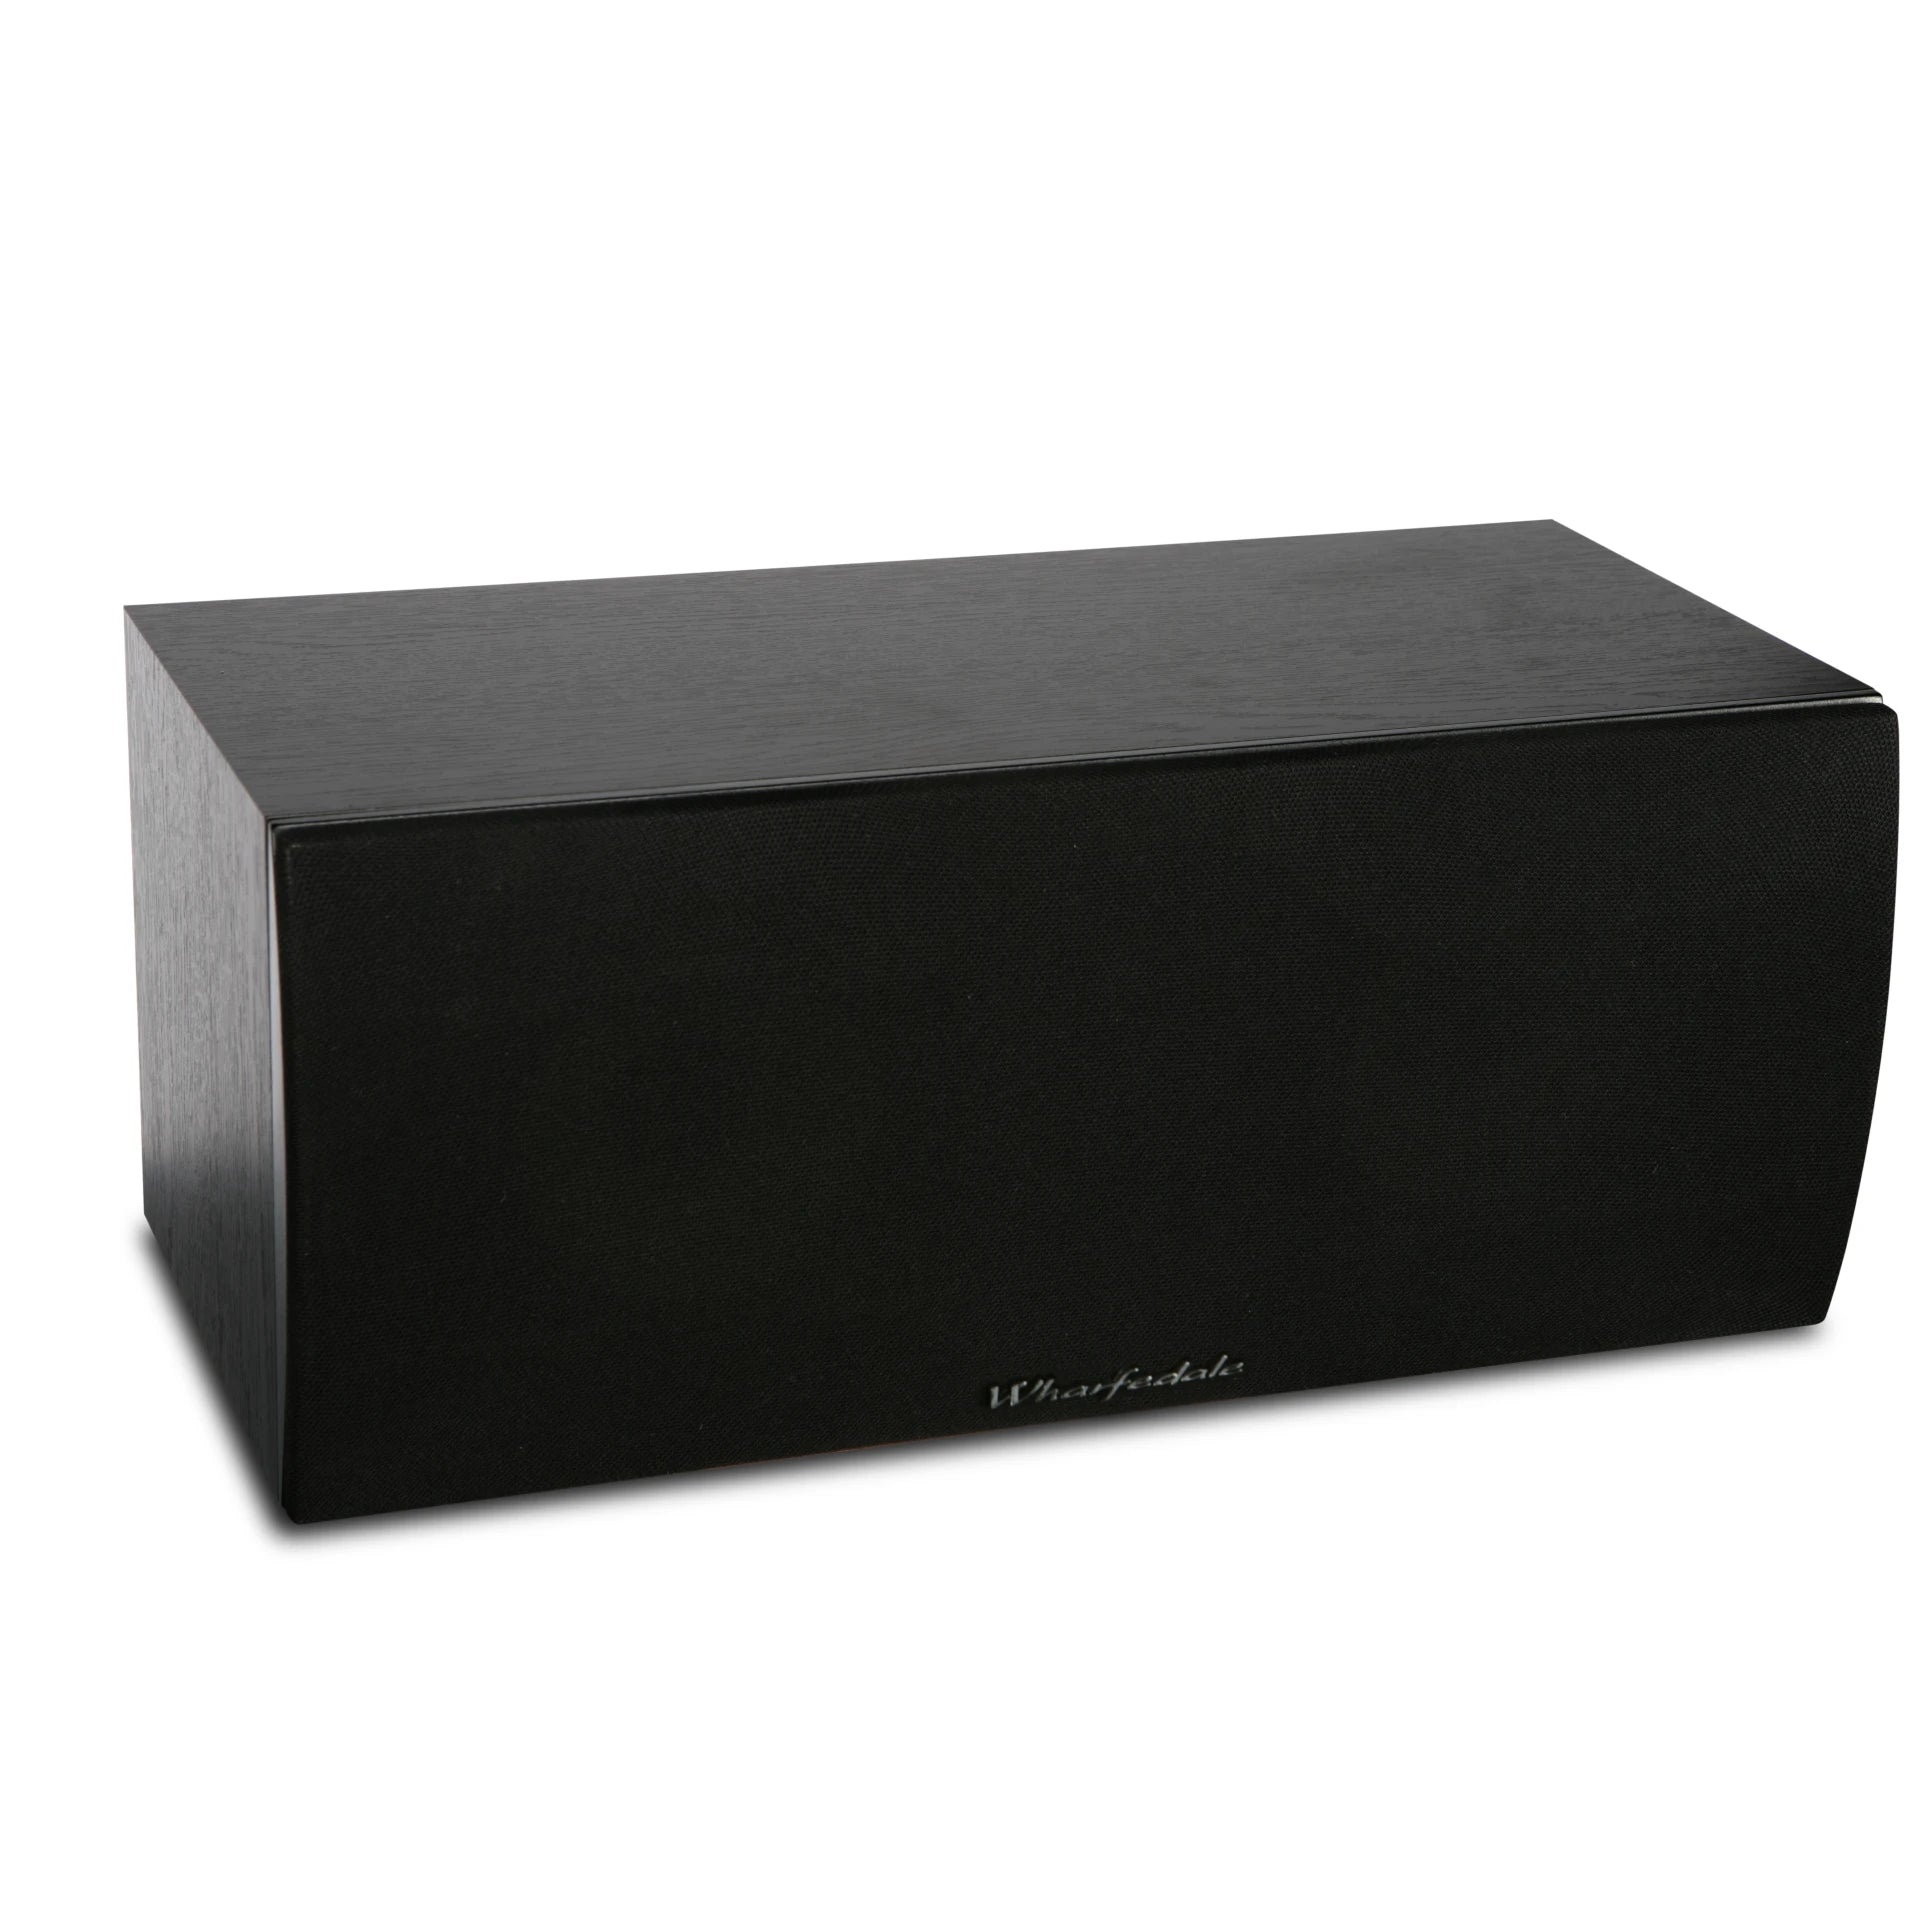 Wharfedale Crystal 4 5.0 - Home Theatre System Package (Black)